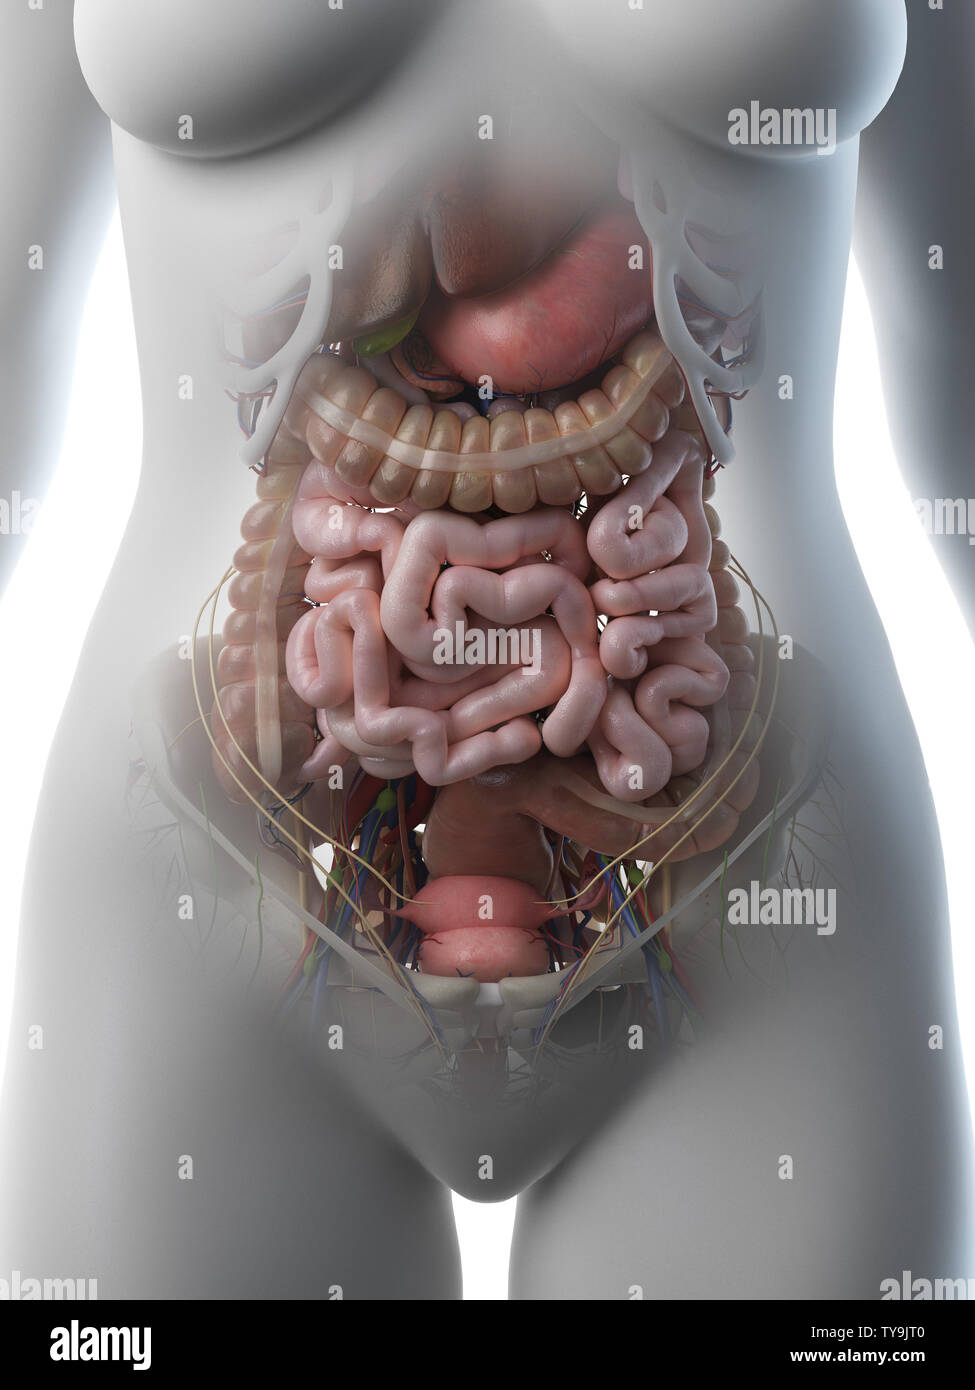 https://c8.alamy.com/comp/TY9JT0/3d-rendered-medically-accurate-illustration-of-a-females-abdominal-organs-TY9JT0.jpg